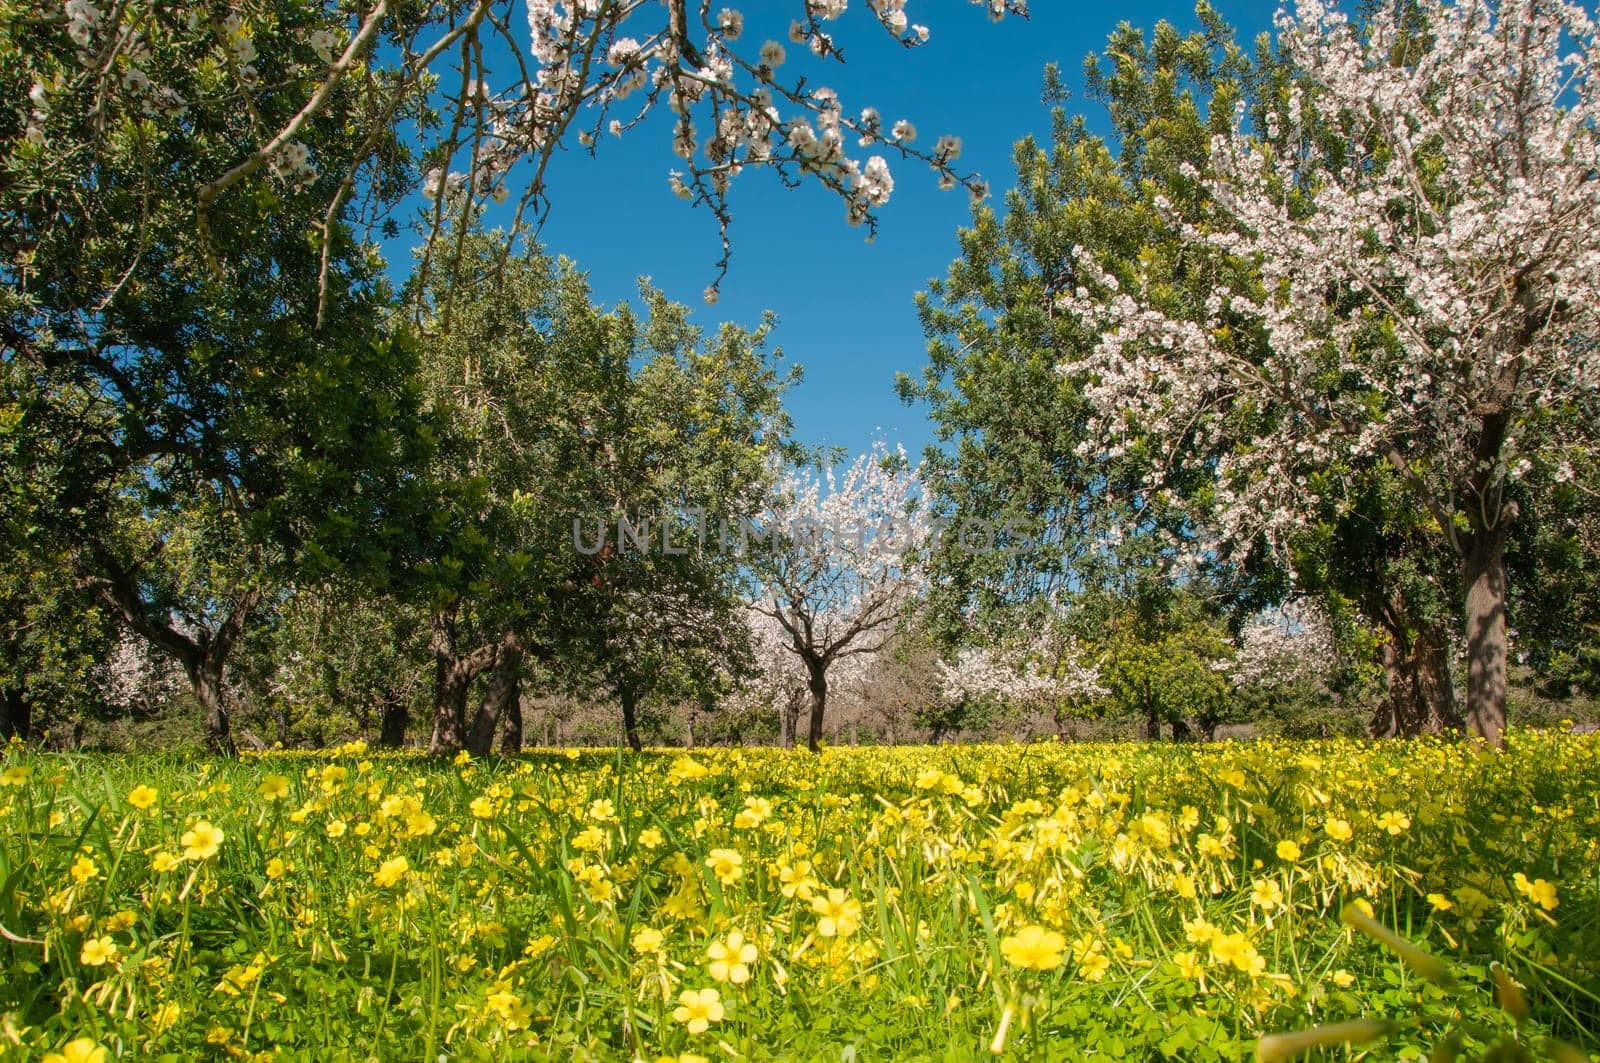 Blossom-laden fruit trees amidst a vibrant carpet of yellow wildflowers under a deep blue sky